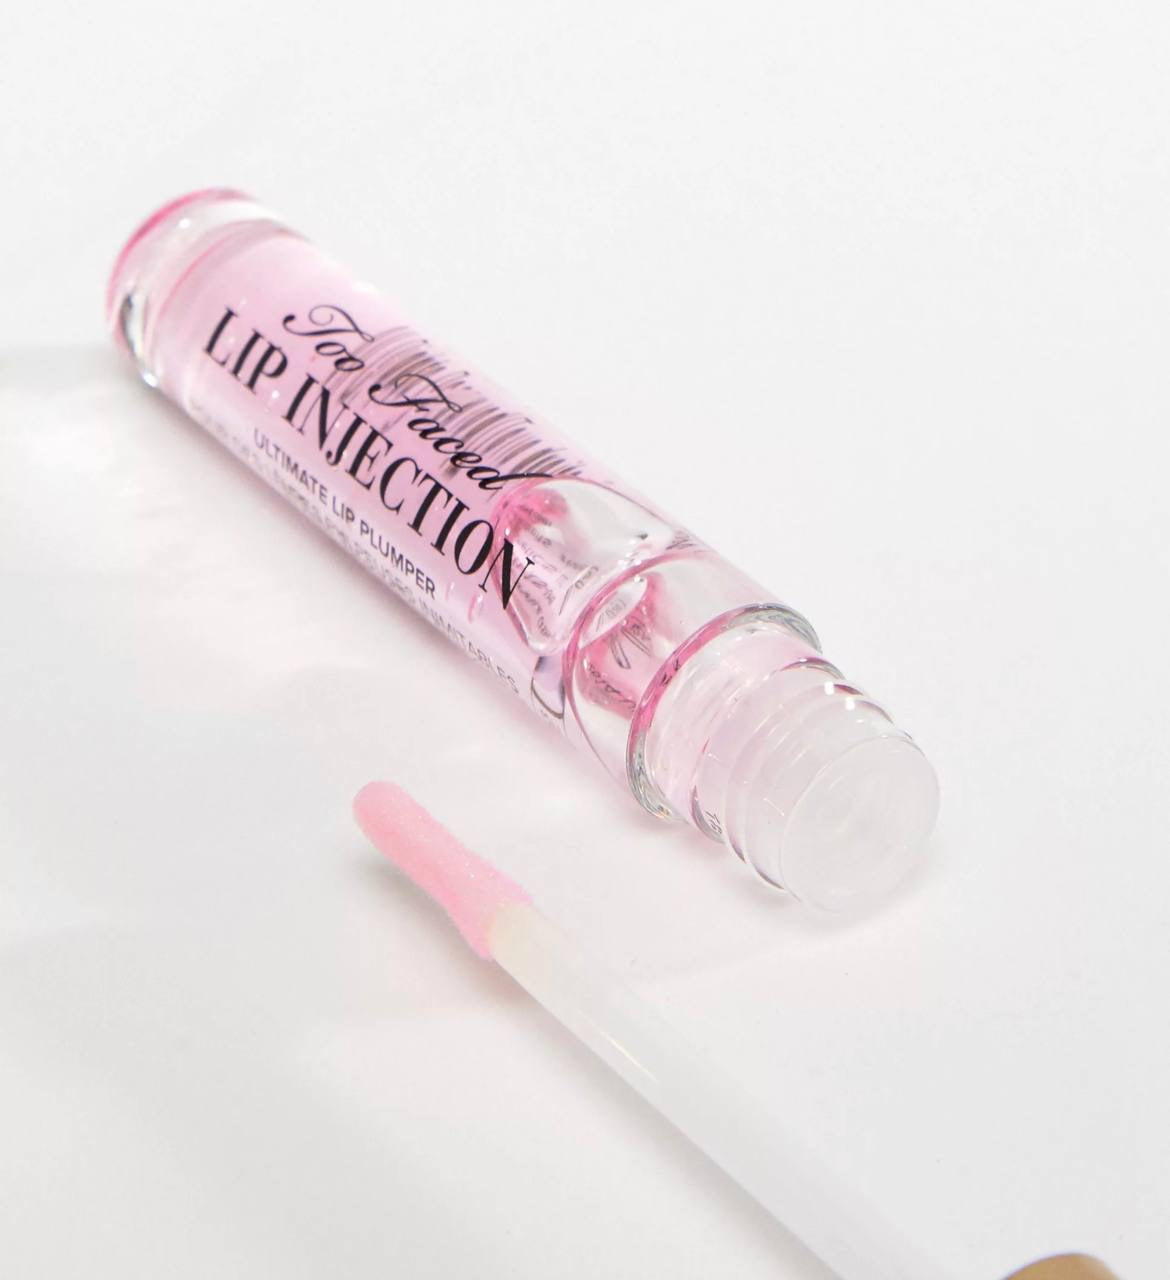 Too faced lip injection clear pink